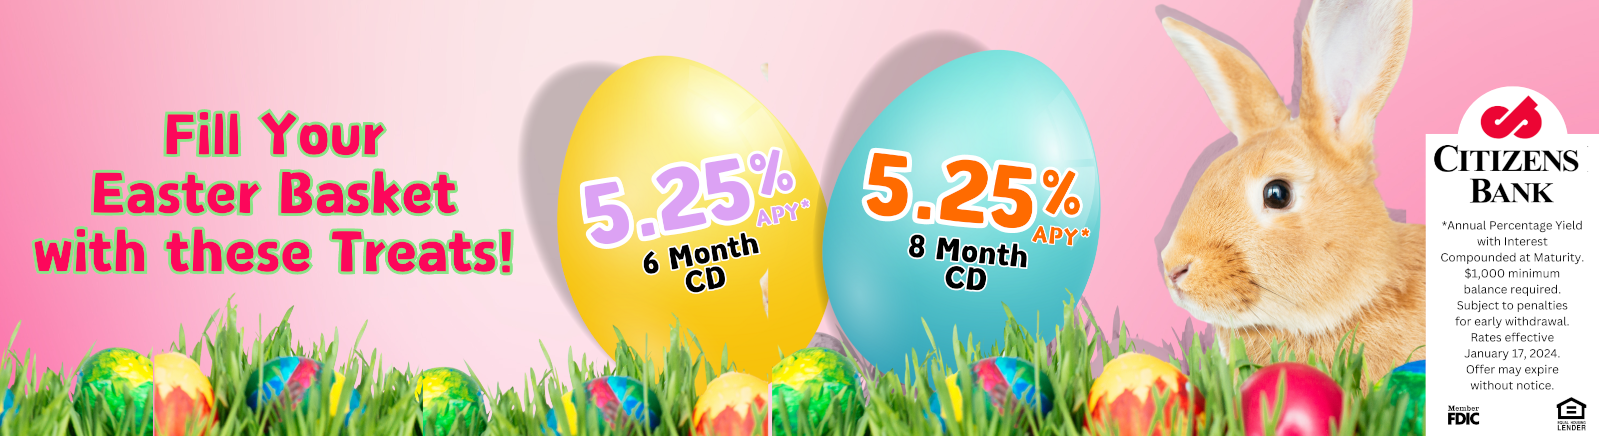 Fill Your Easter Basket with these Treats. 5.25%APY 6 Month CD 5.25% APY 8 Month CD CITIZENS BANK Member FDIC Equal Housing Lender *Annual Percentage Yield with Interest Componded at Maturity. $1,000 minimum balanced required. Subject to penalties to early withdrawl. Rates effective January 17, 2024. Offer may expire without notice.